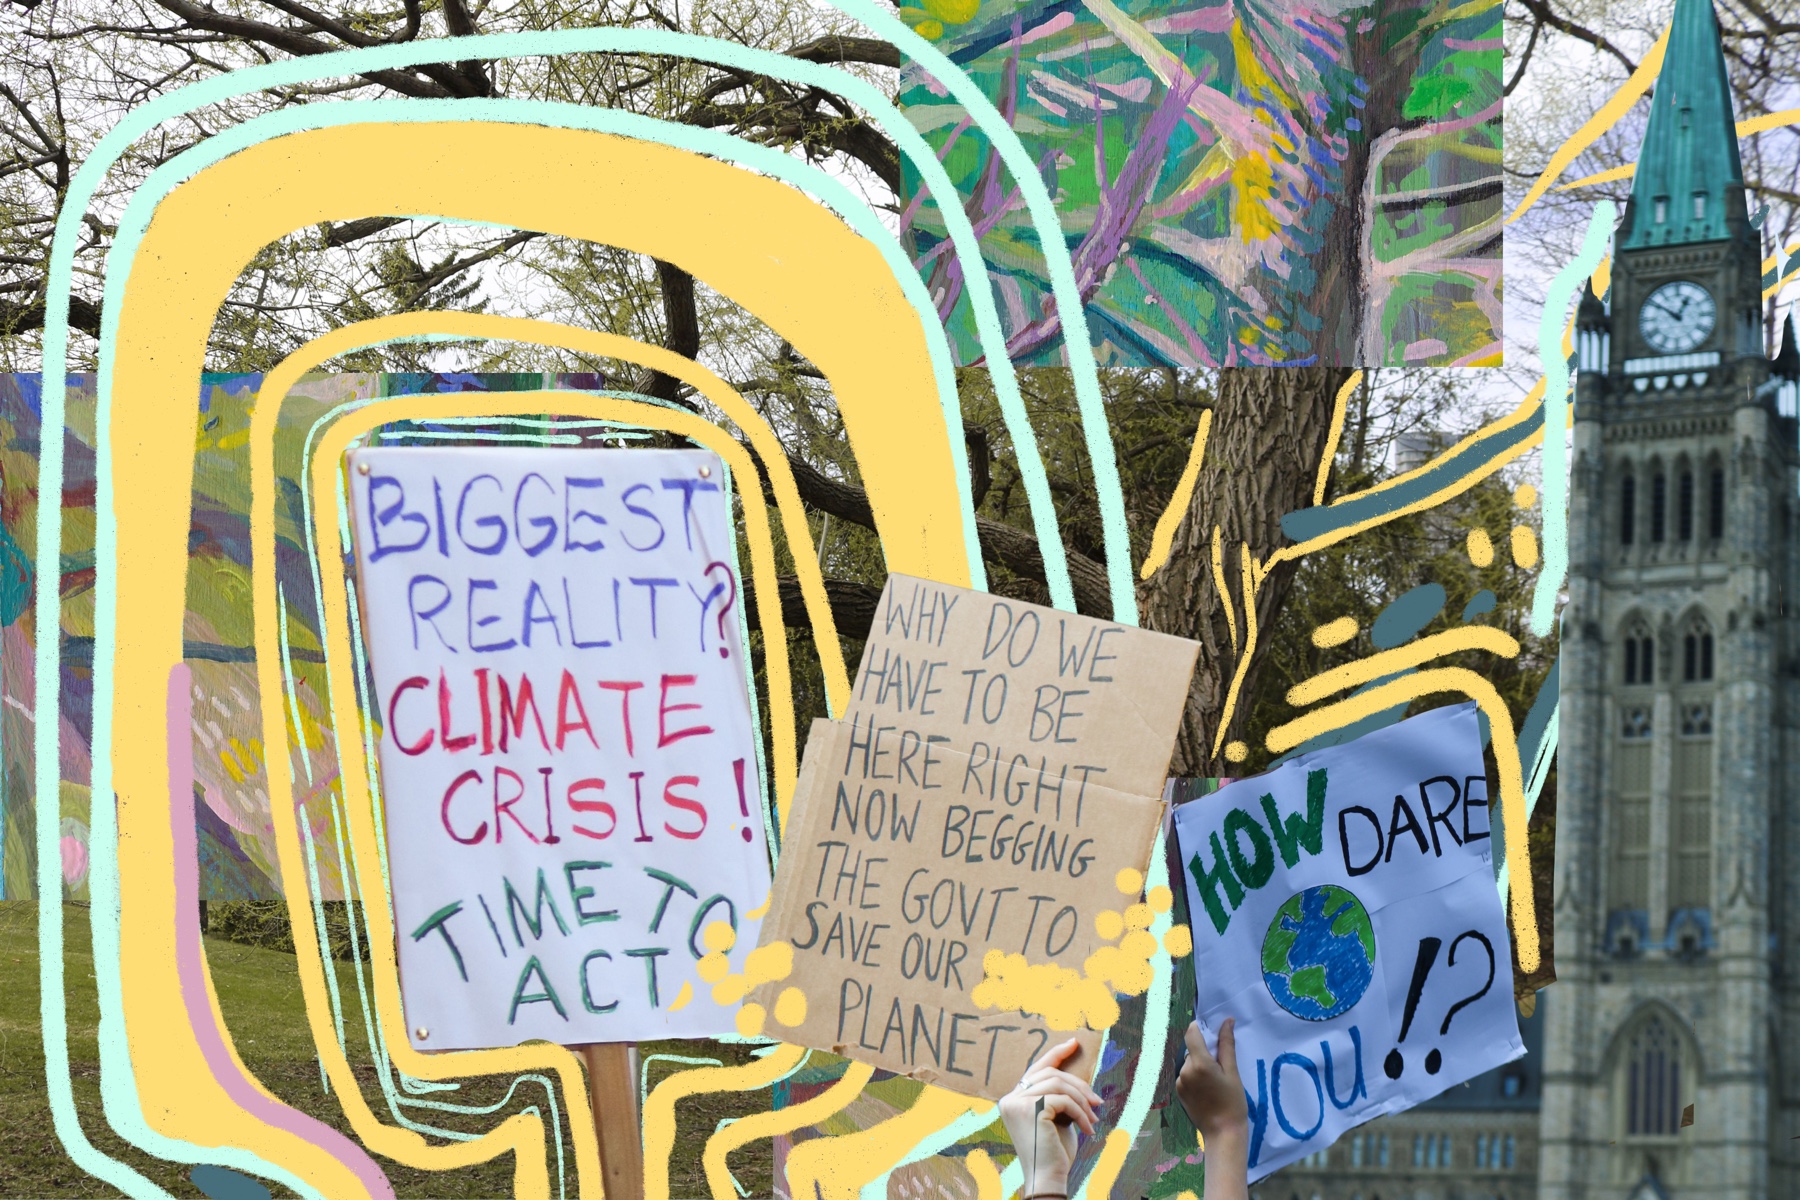 Signs that says "Biggest reality? Climate crisis! Time to act," "Why do we have to be here right now begging our govt to save our planet," and "How dare you?!"